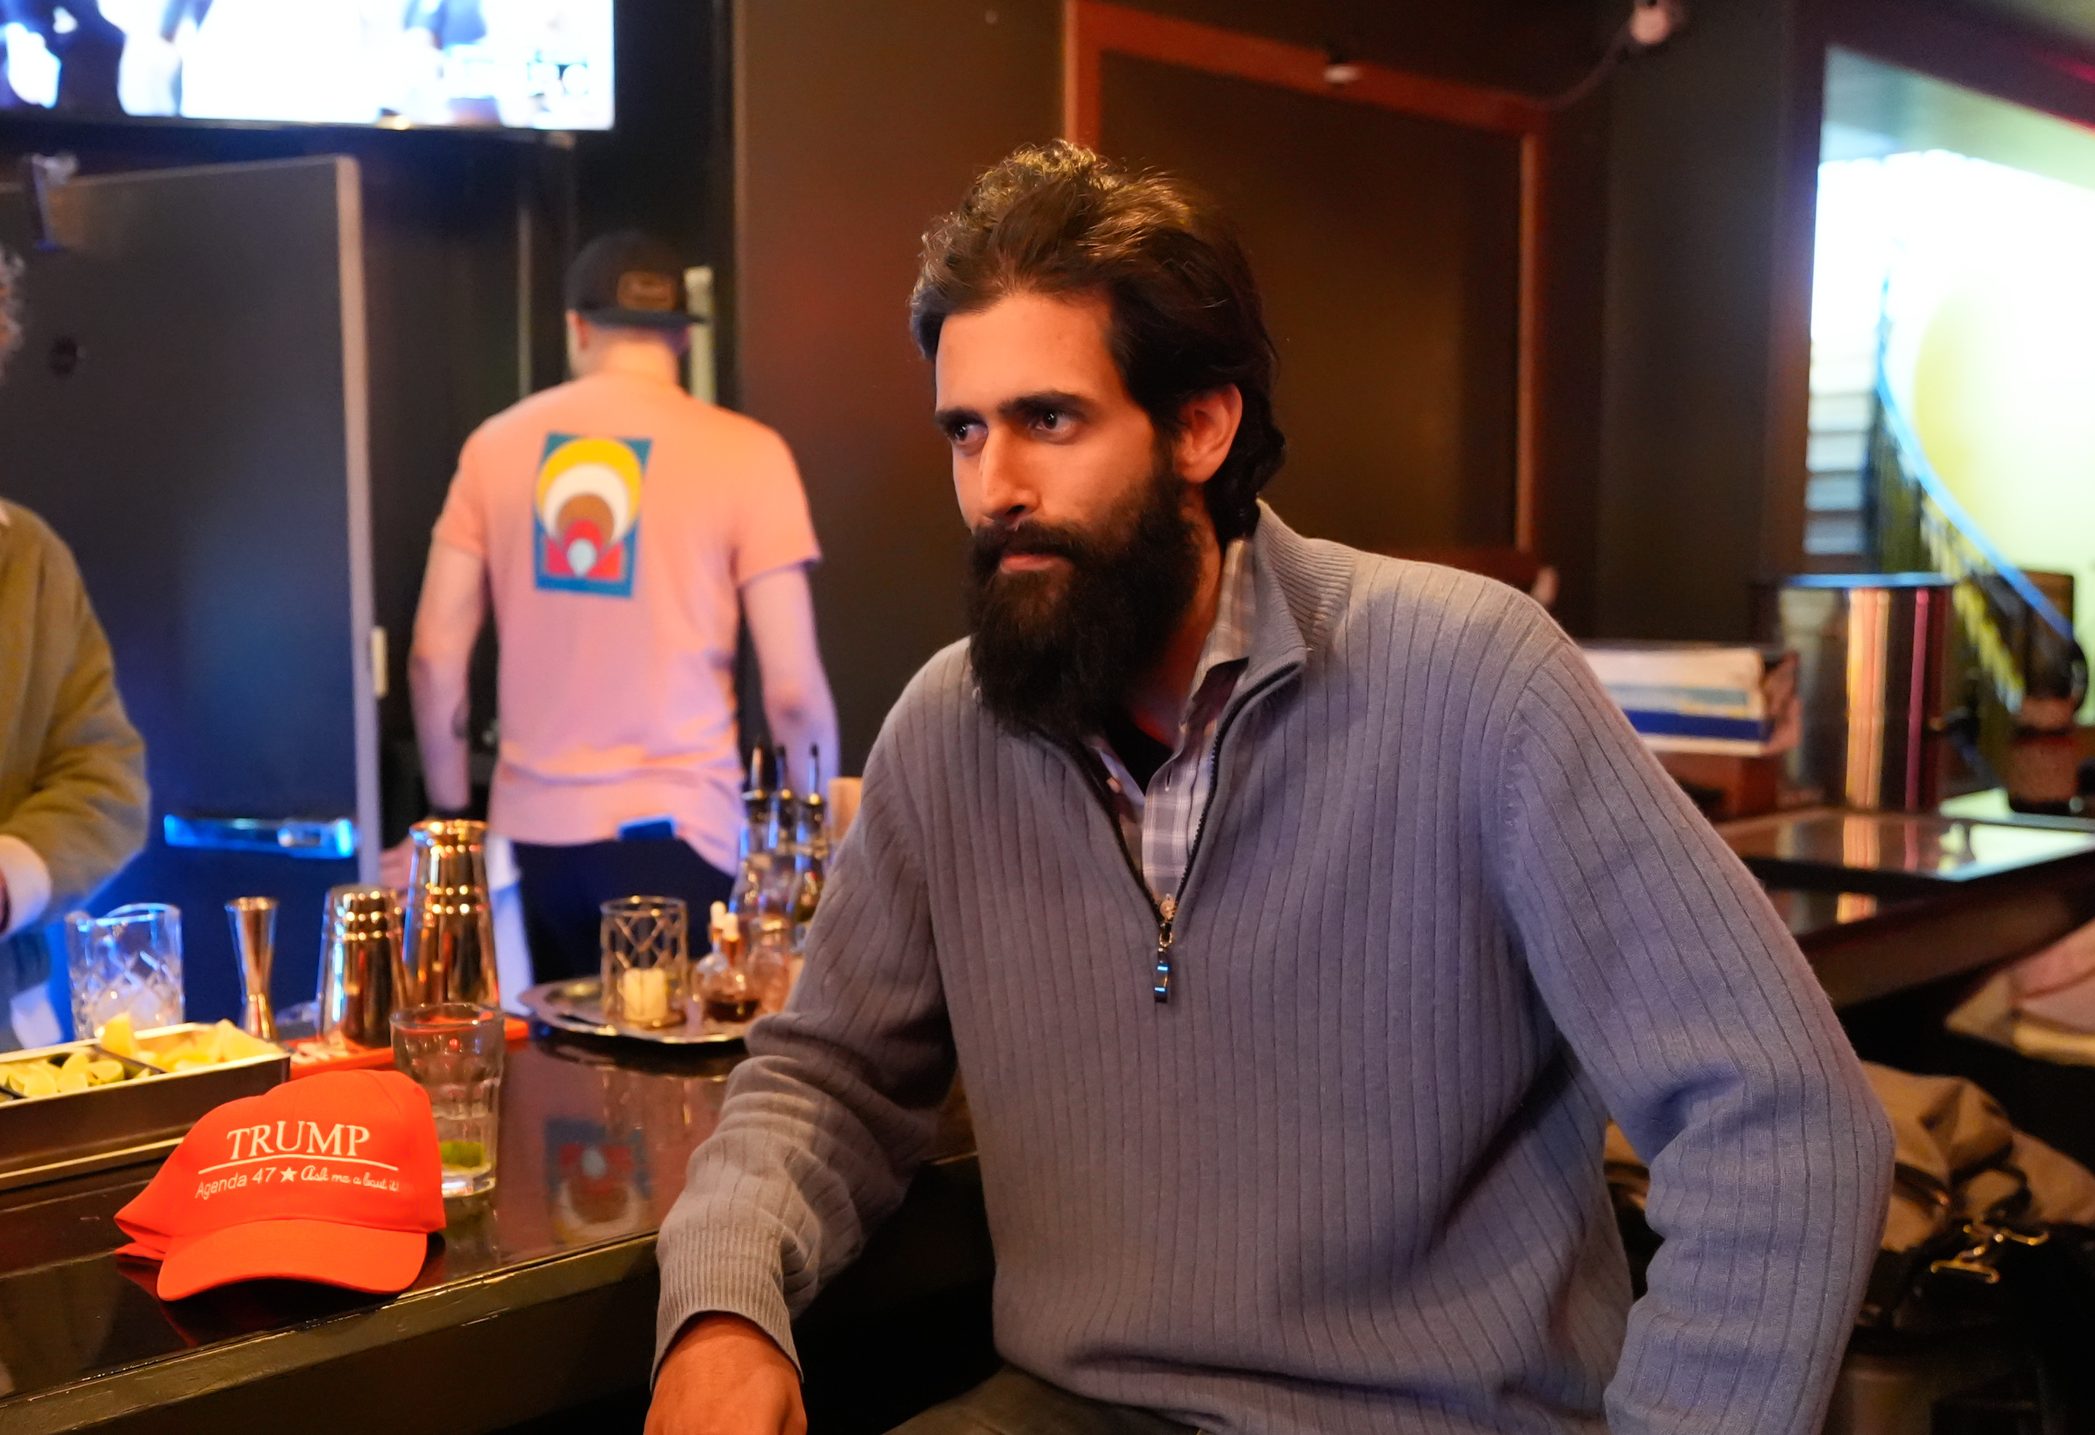 A man with a beard in a gray sweater is sitting at a bar counter, next to a red "Trump" hat. A bartender is preparing drinks and a TV is on in the background.